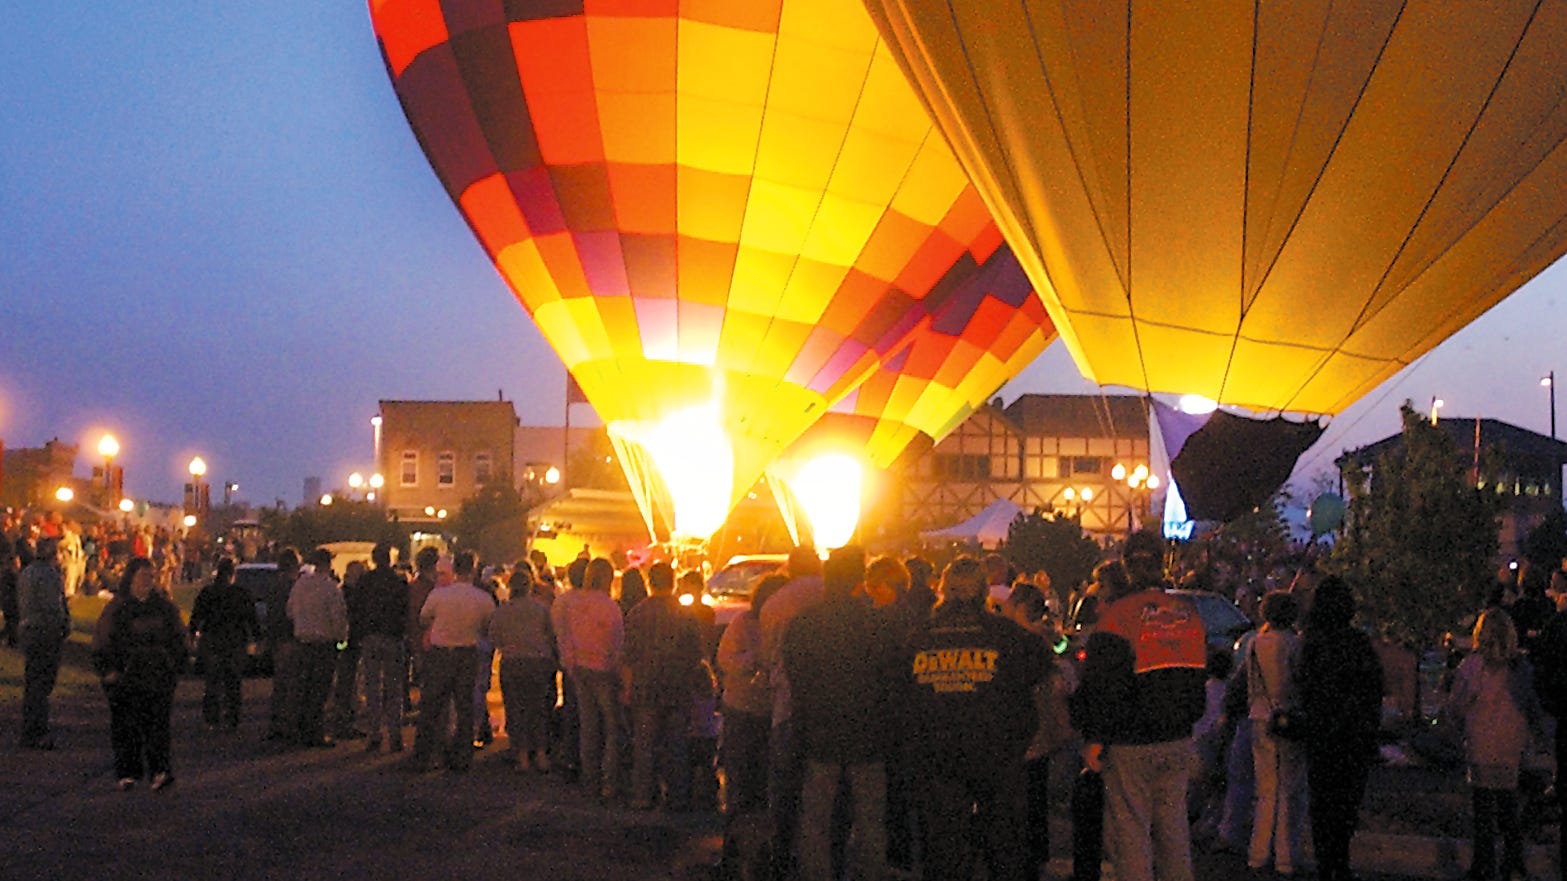 New event brings hot air balloons back to Manitowoc